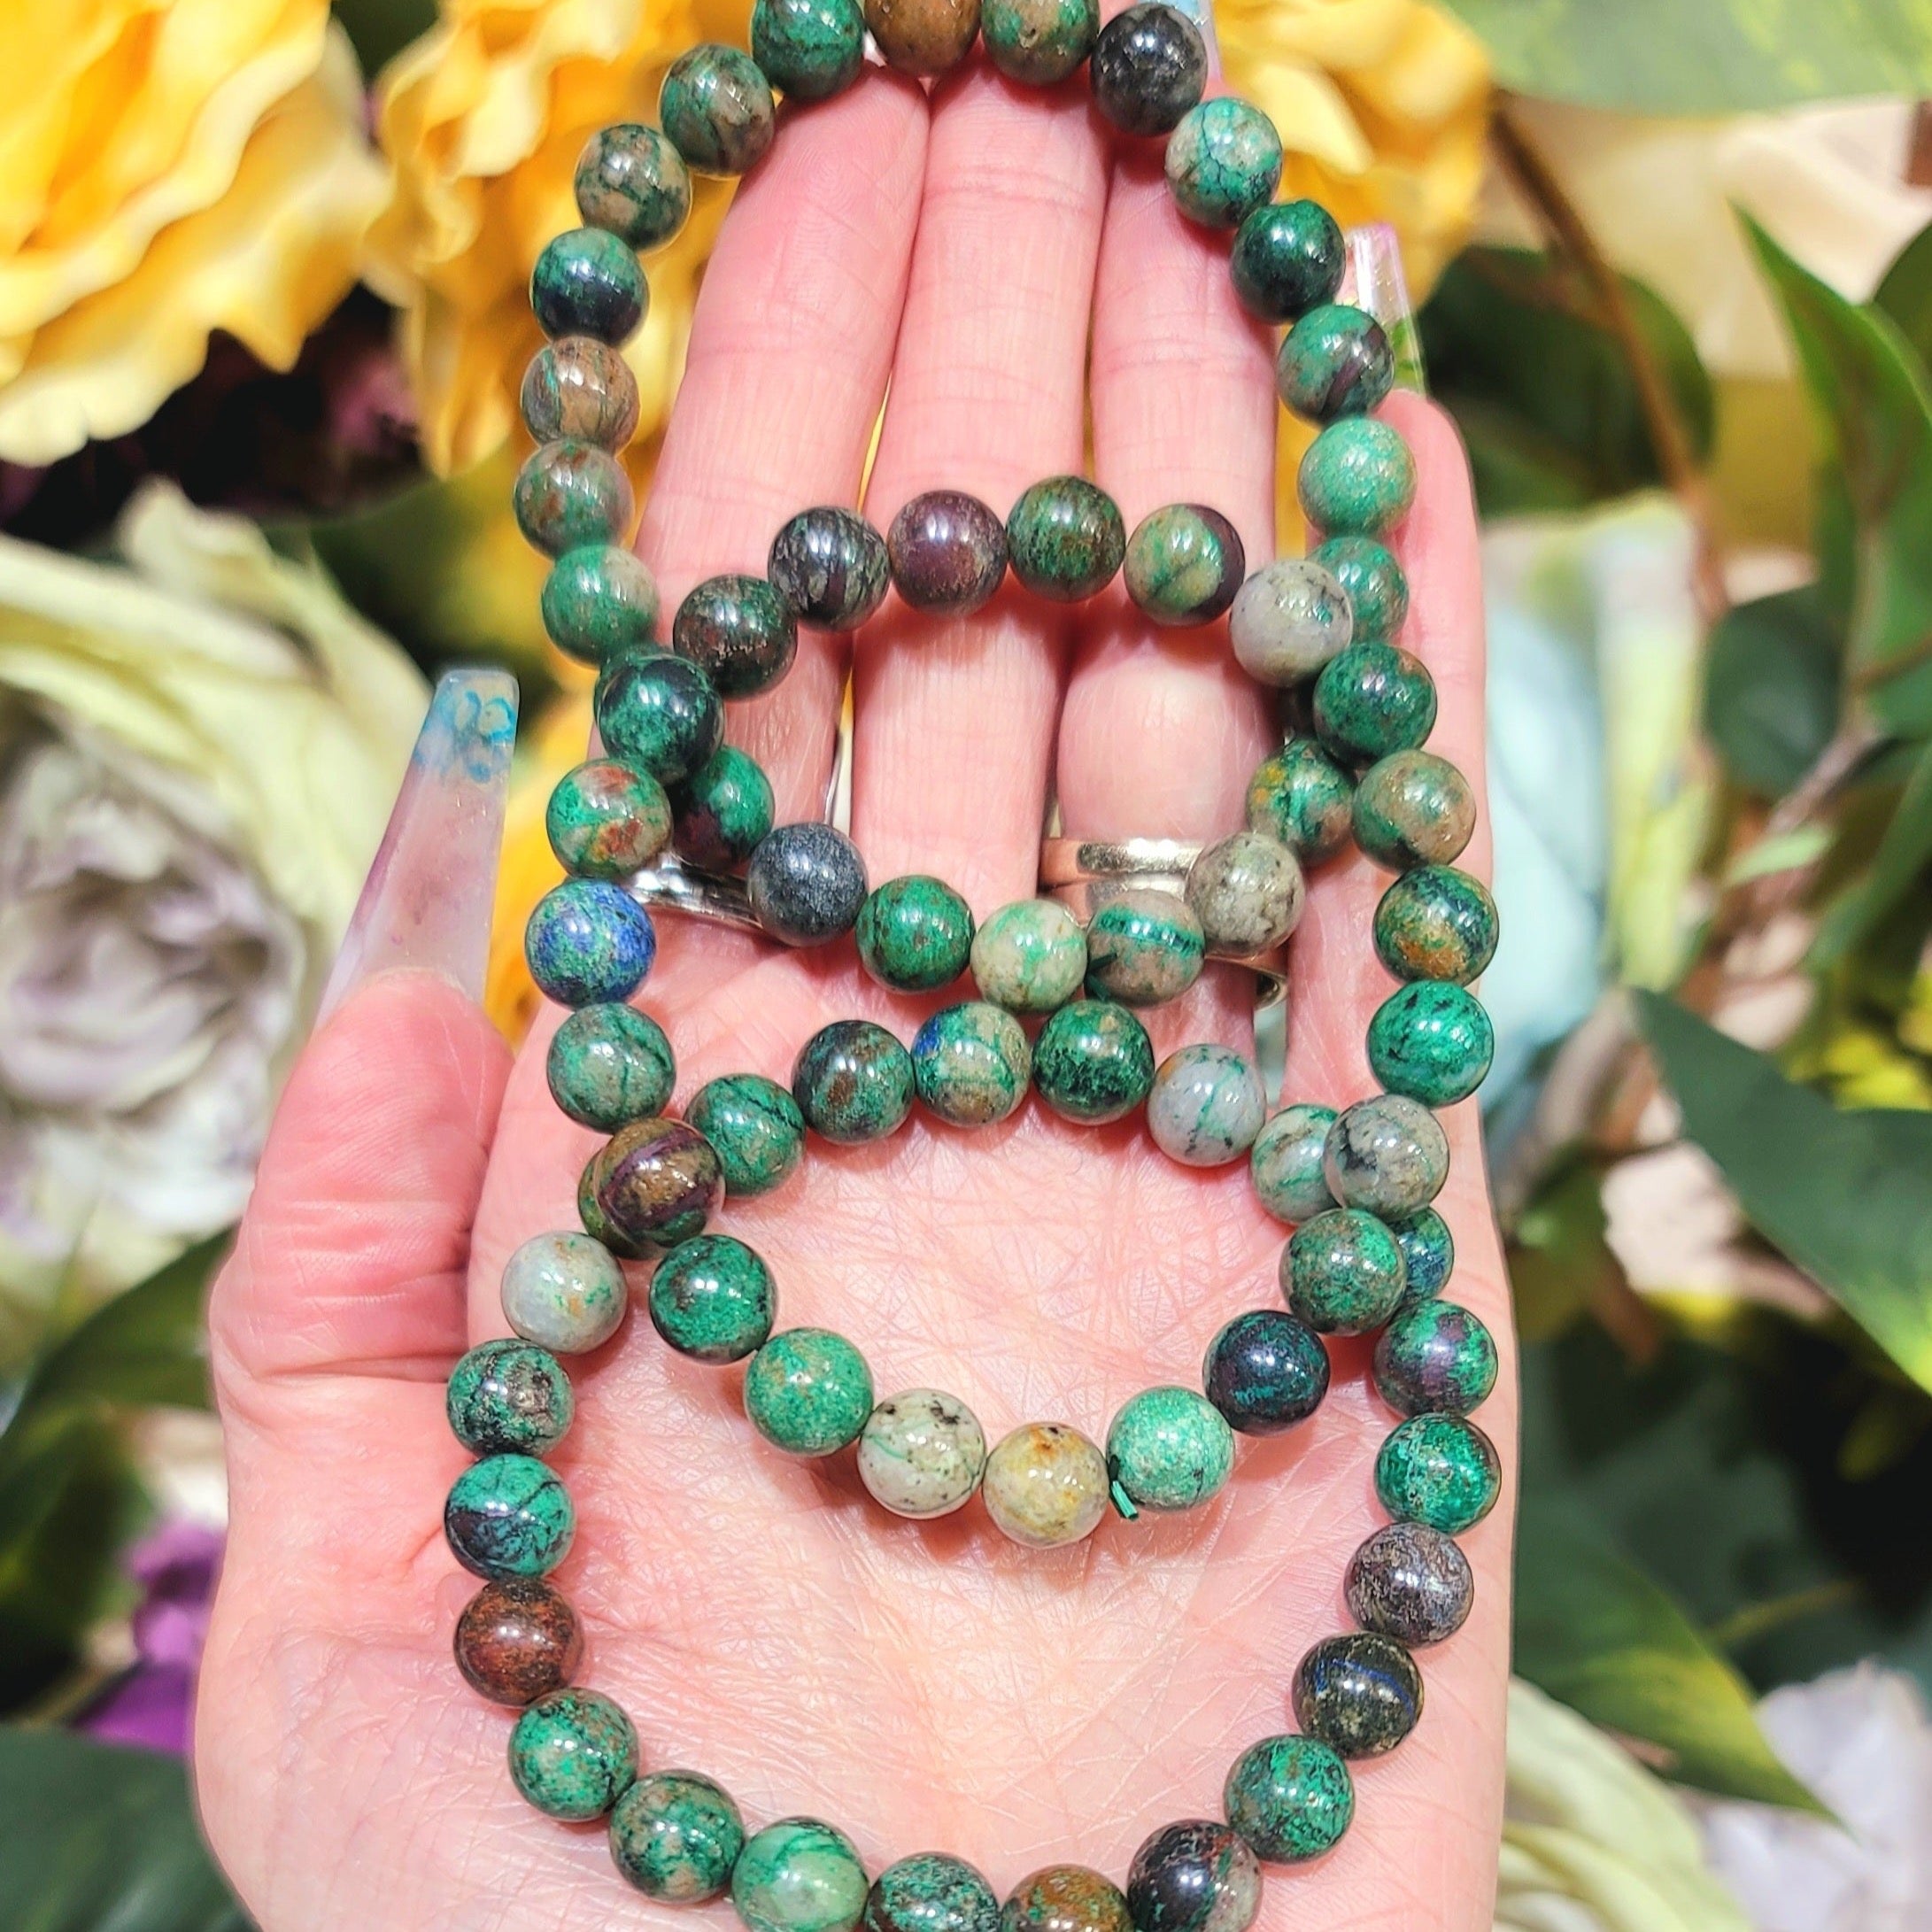 Cuprite and Chrysocolla (Sonora Sunset) Bracelet for Hope, Meditation and Serenity